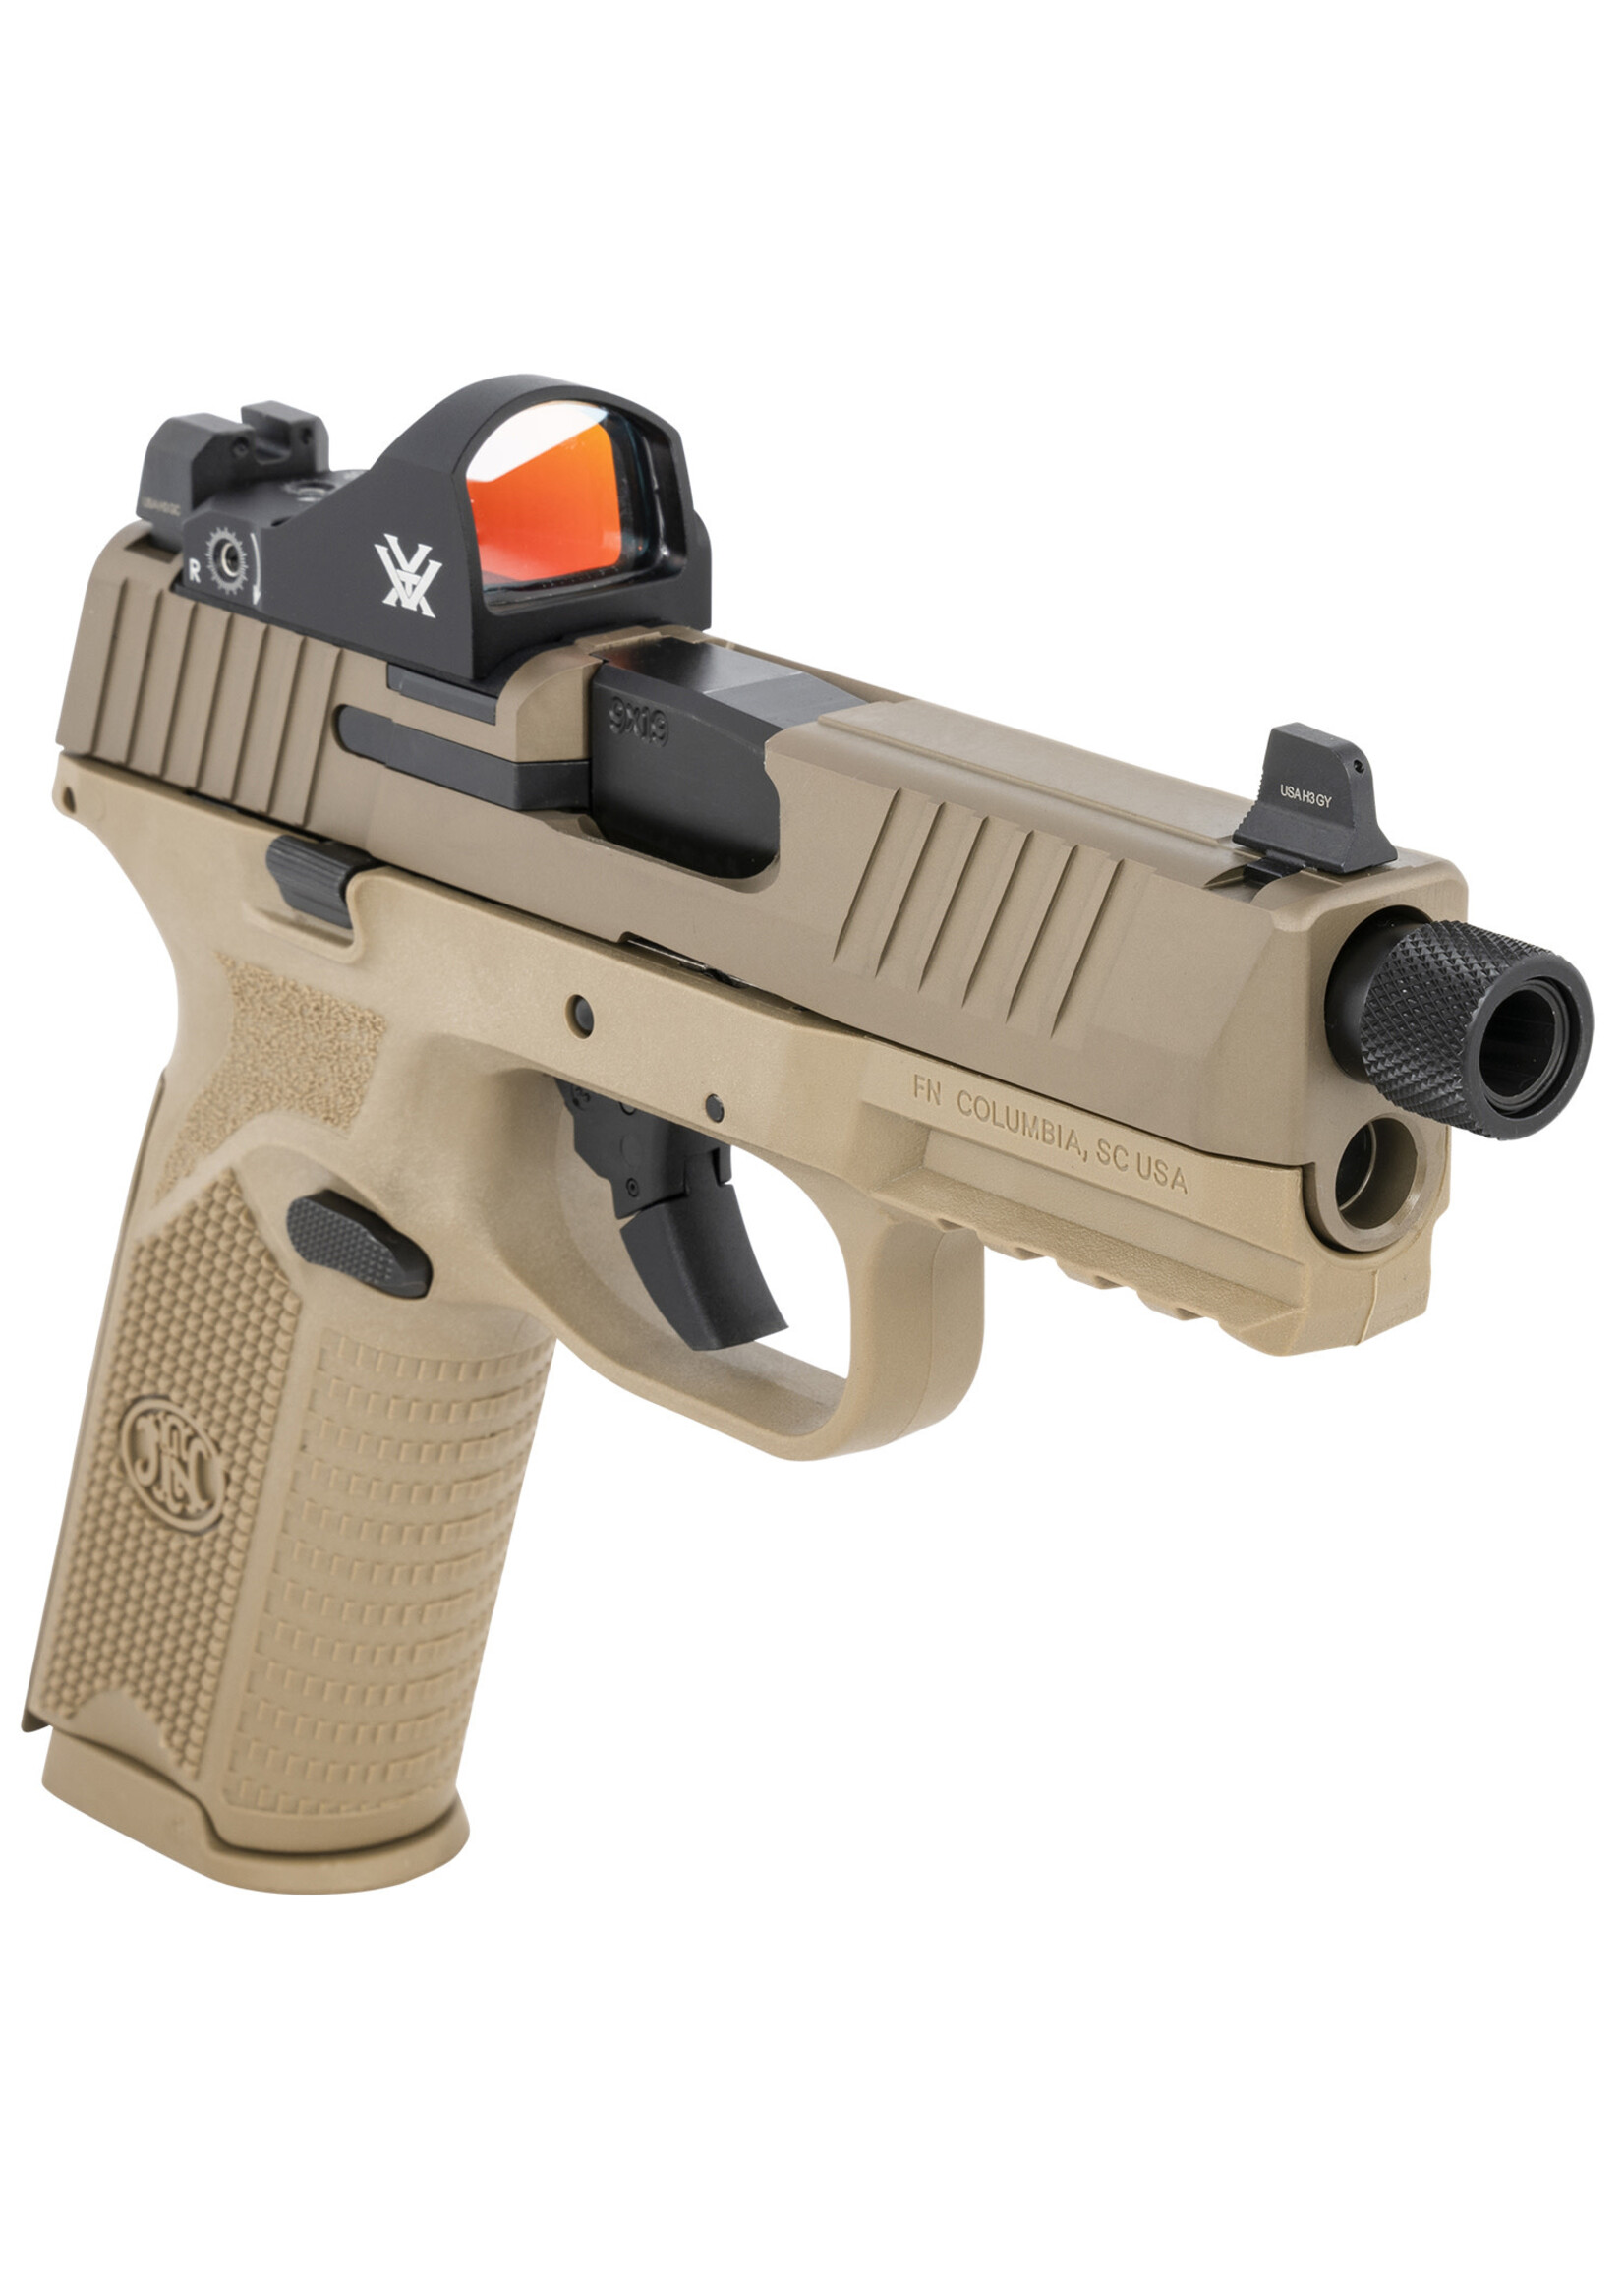 FN FN 66100845 509 Tactical 9mm Luger 17+1/24+1 4.50" Threaded Barrel, Flat Dark Earth Polymer Frame w/Mounting Rail, Optic Cut FDE Stainless Steel Slide, No Manual Safety, Includes Viper Red Dot